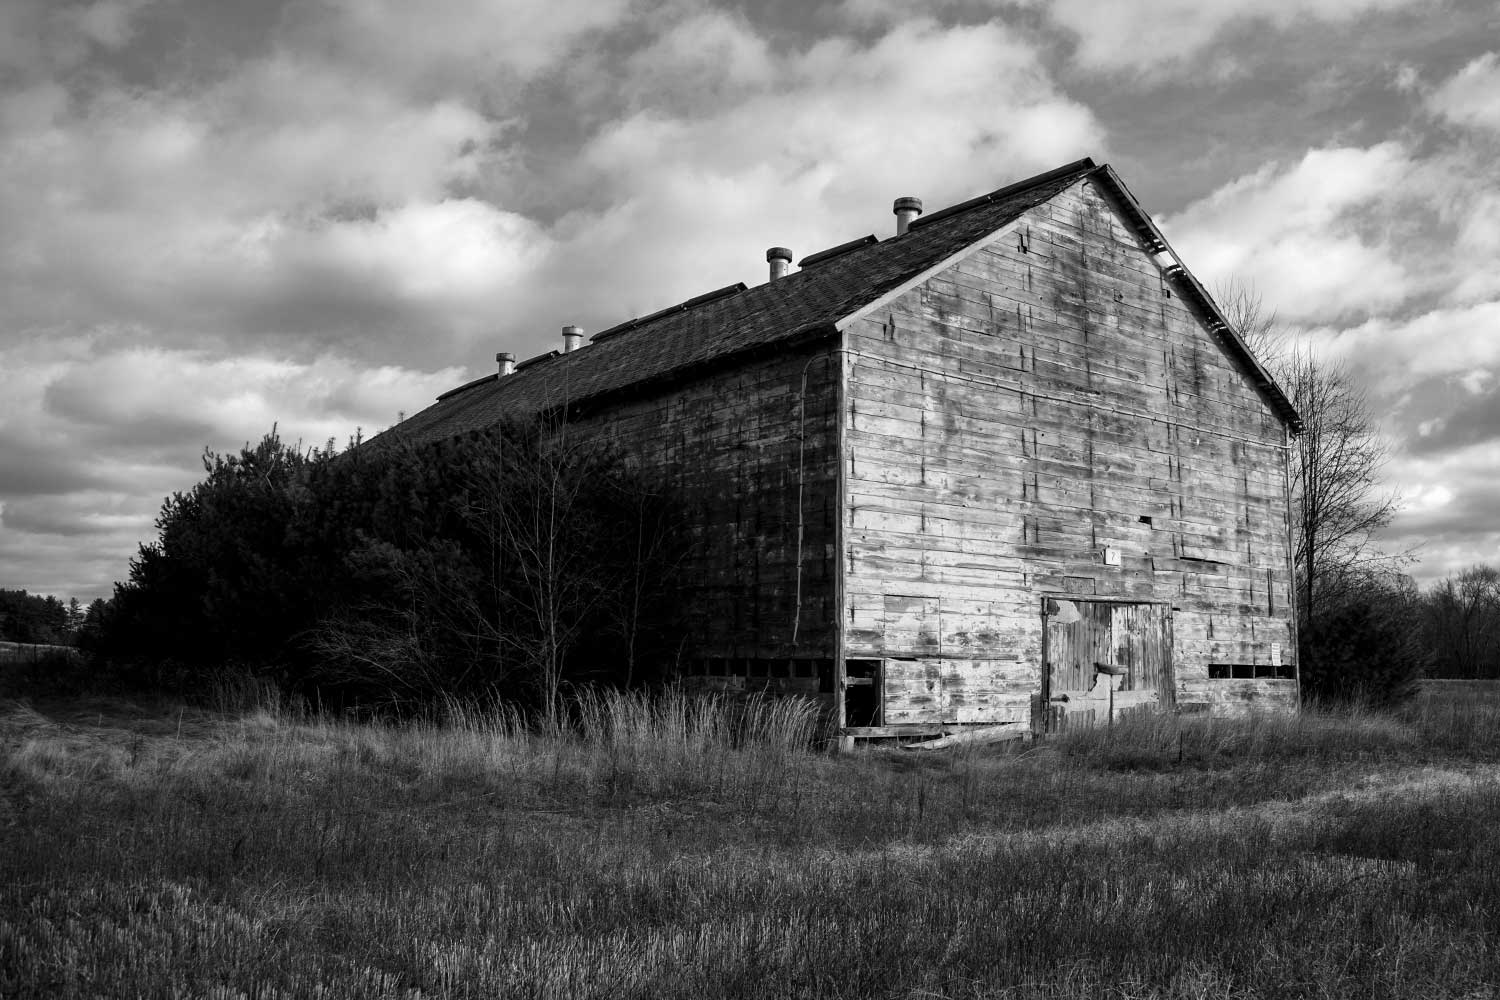 Exterior of a tobacco barn in Simsbury, CT where Martin Luther King Jr. worked in 1947.